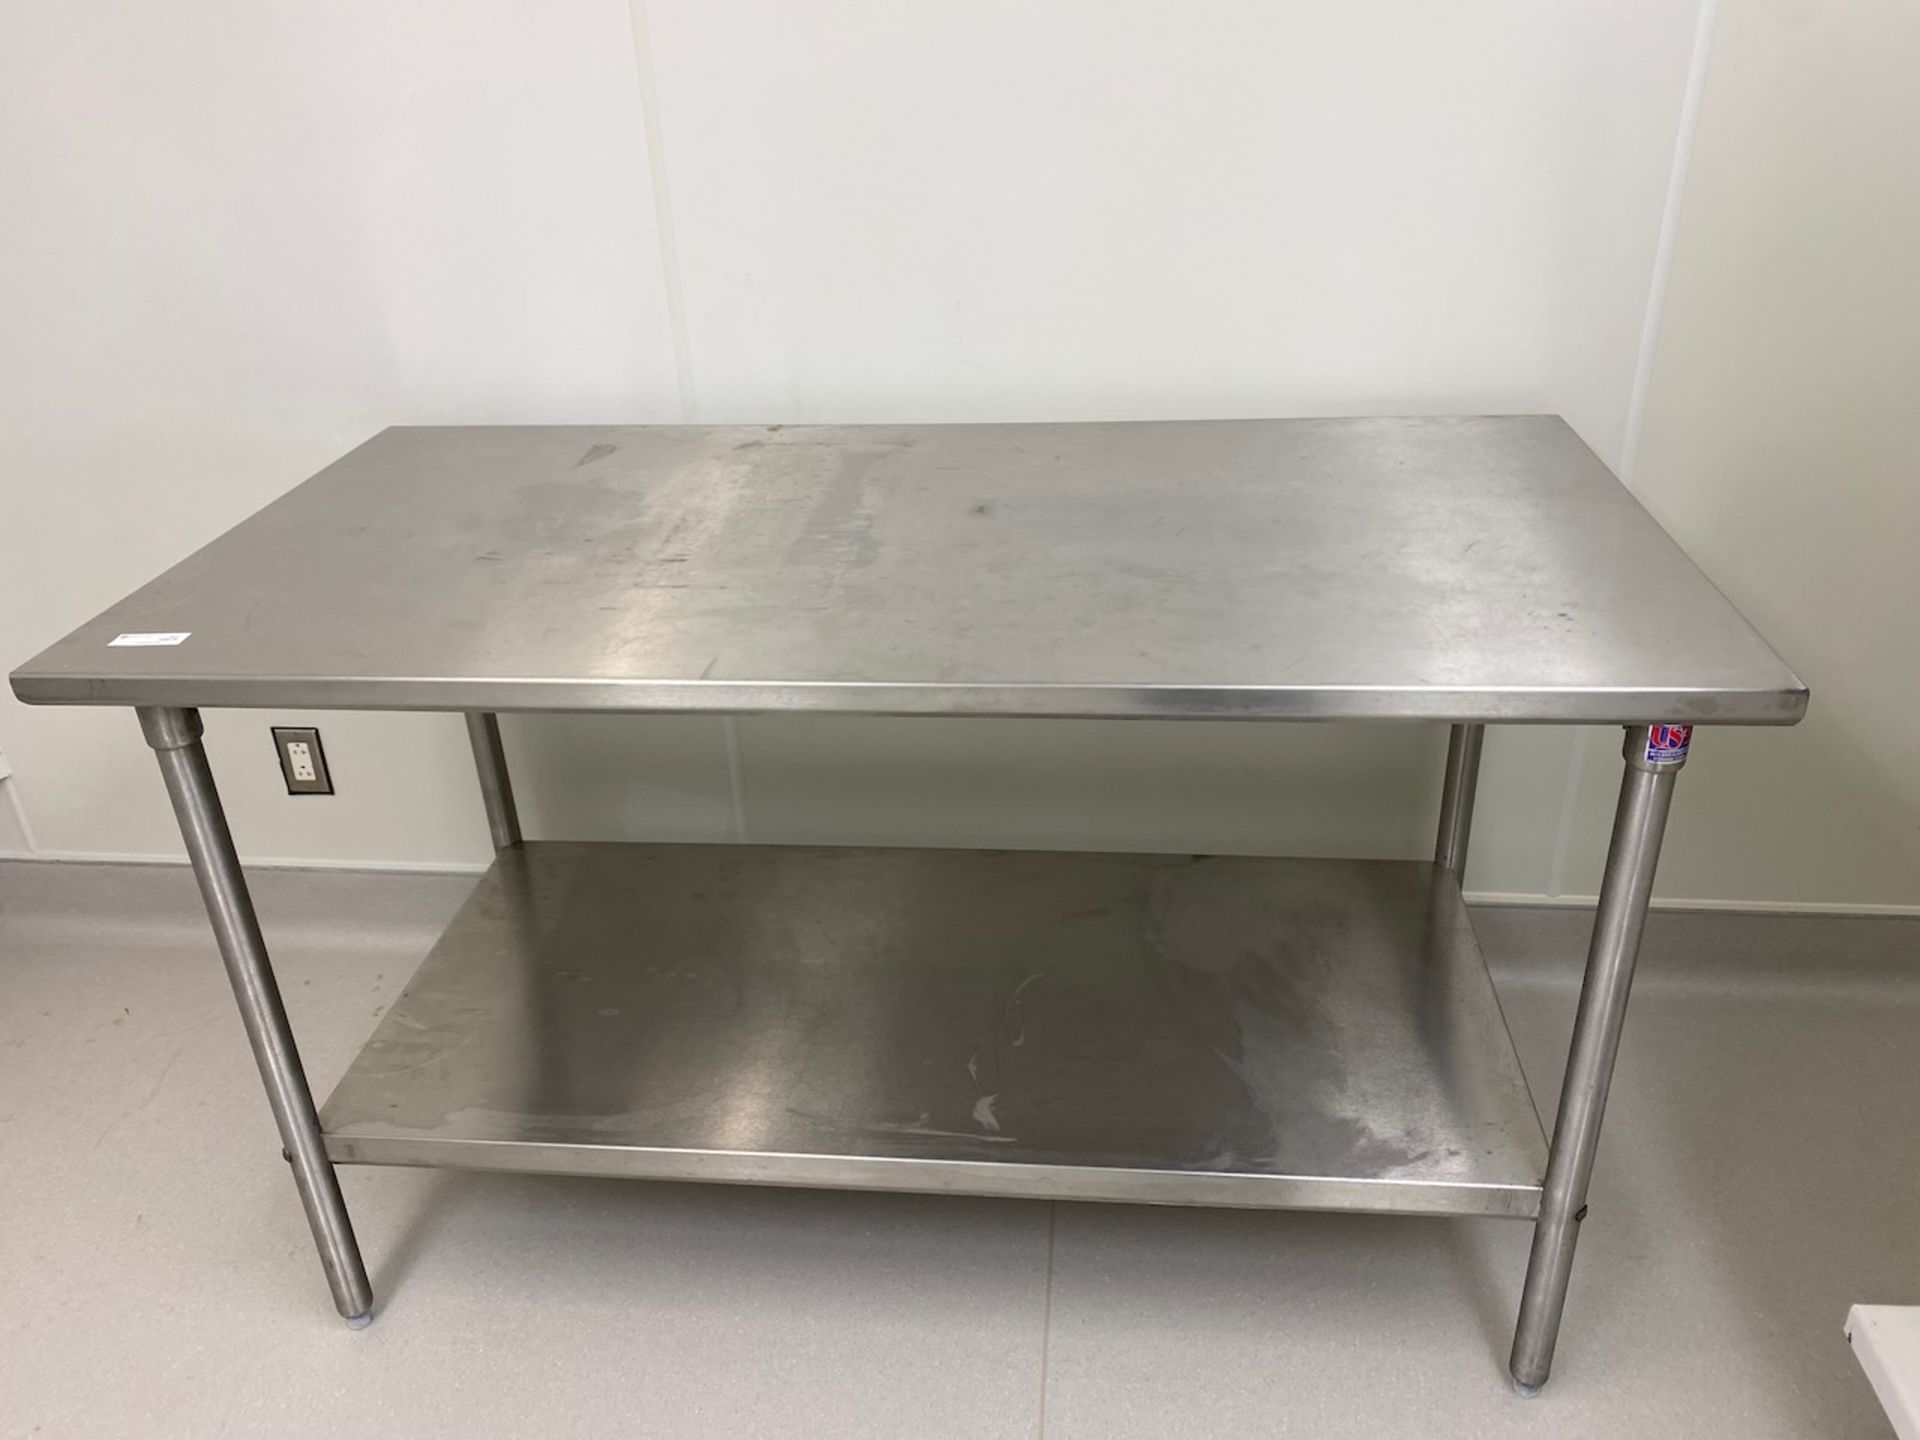 Lot of two stainless steel tables - Image 2 of 4